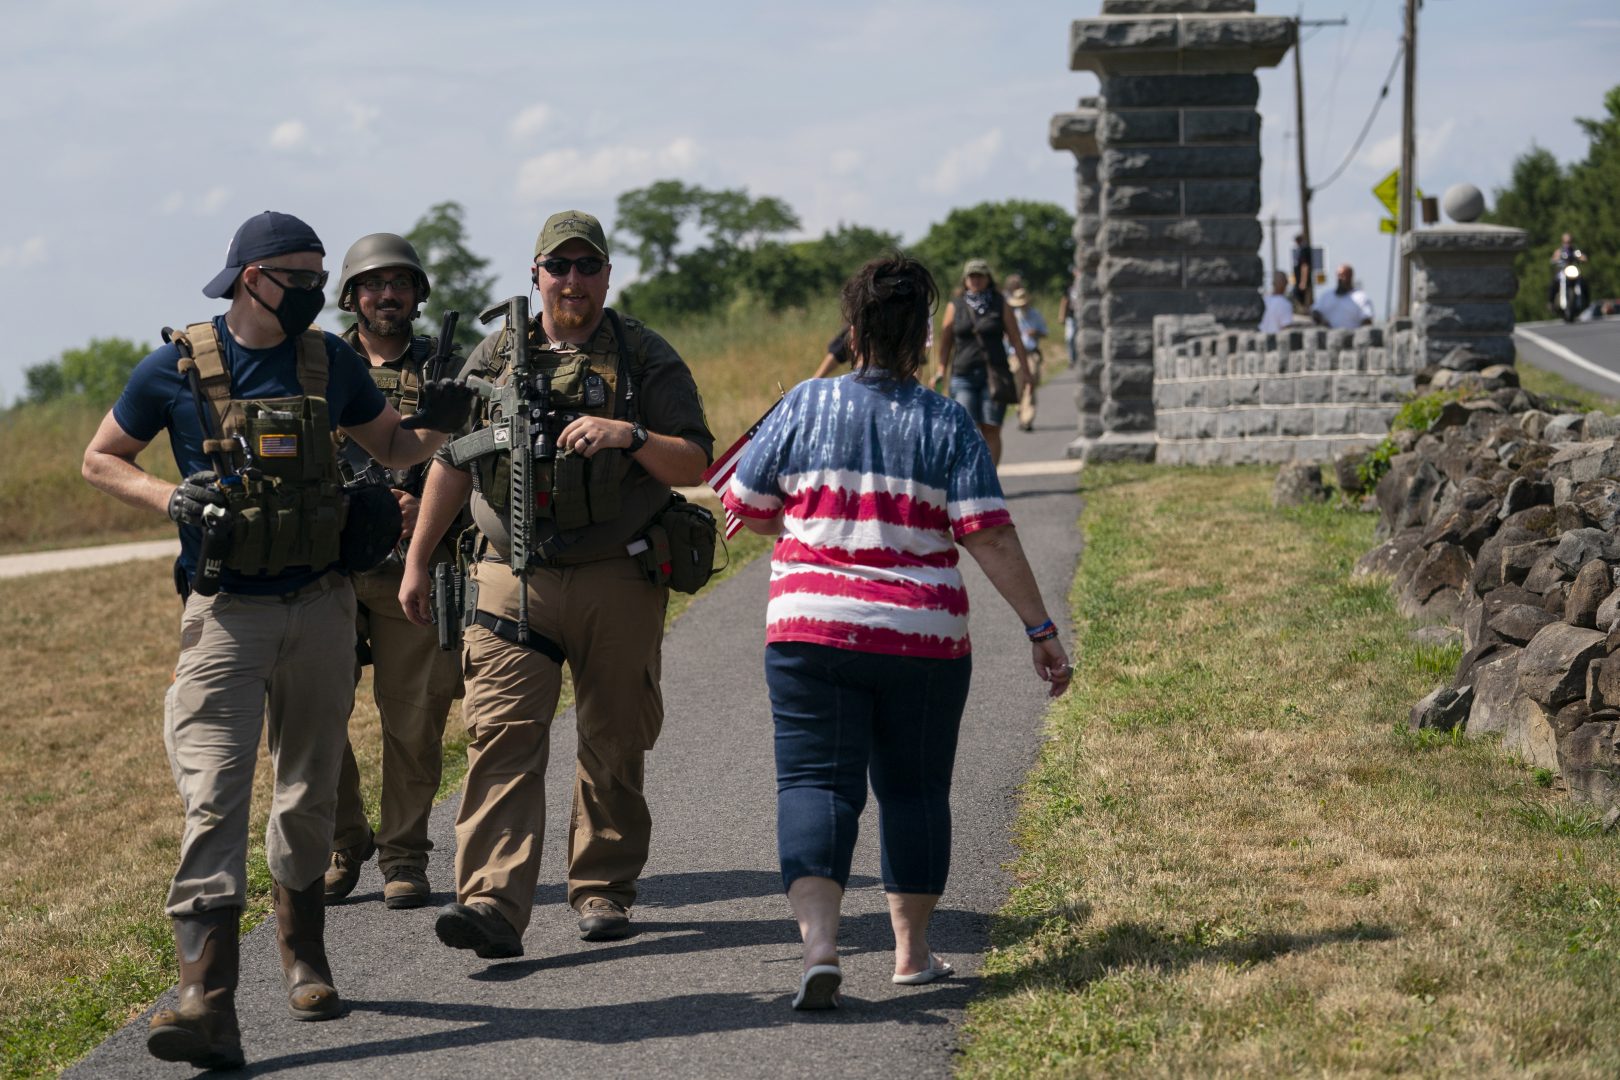 Members of a militia walk past a tourist as they patrol the area surrounding the Gettysburg National Cemetery Saturday, July 4, 2020, at Gettysburg National Military Park, in Gettysburg, Pa. (AP Photo/Carolyn Kaster)